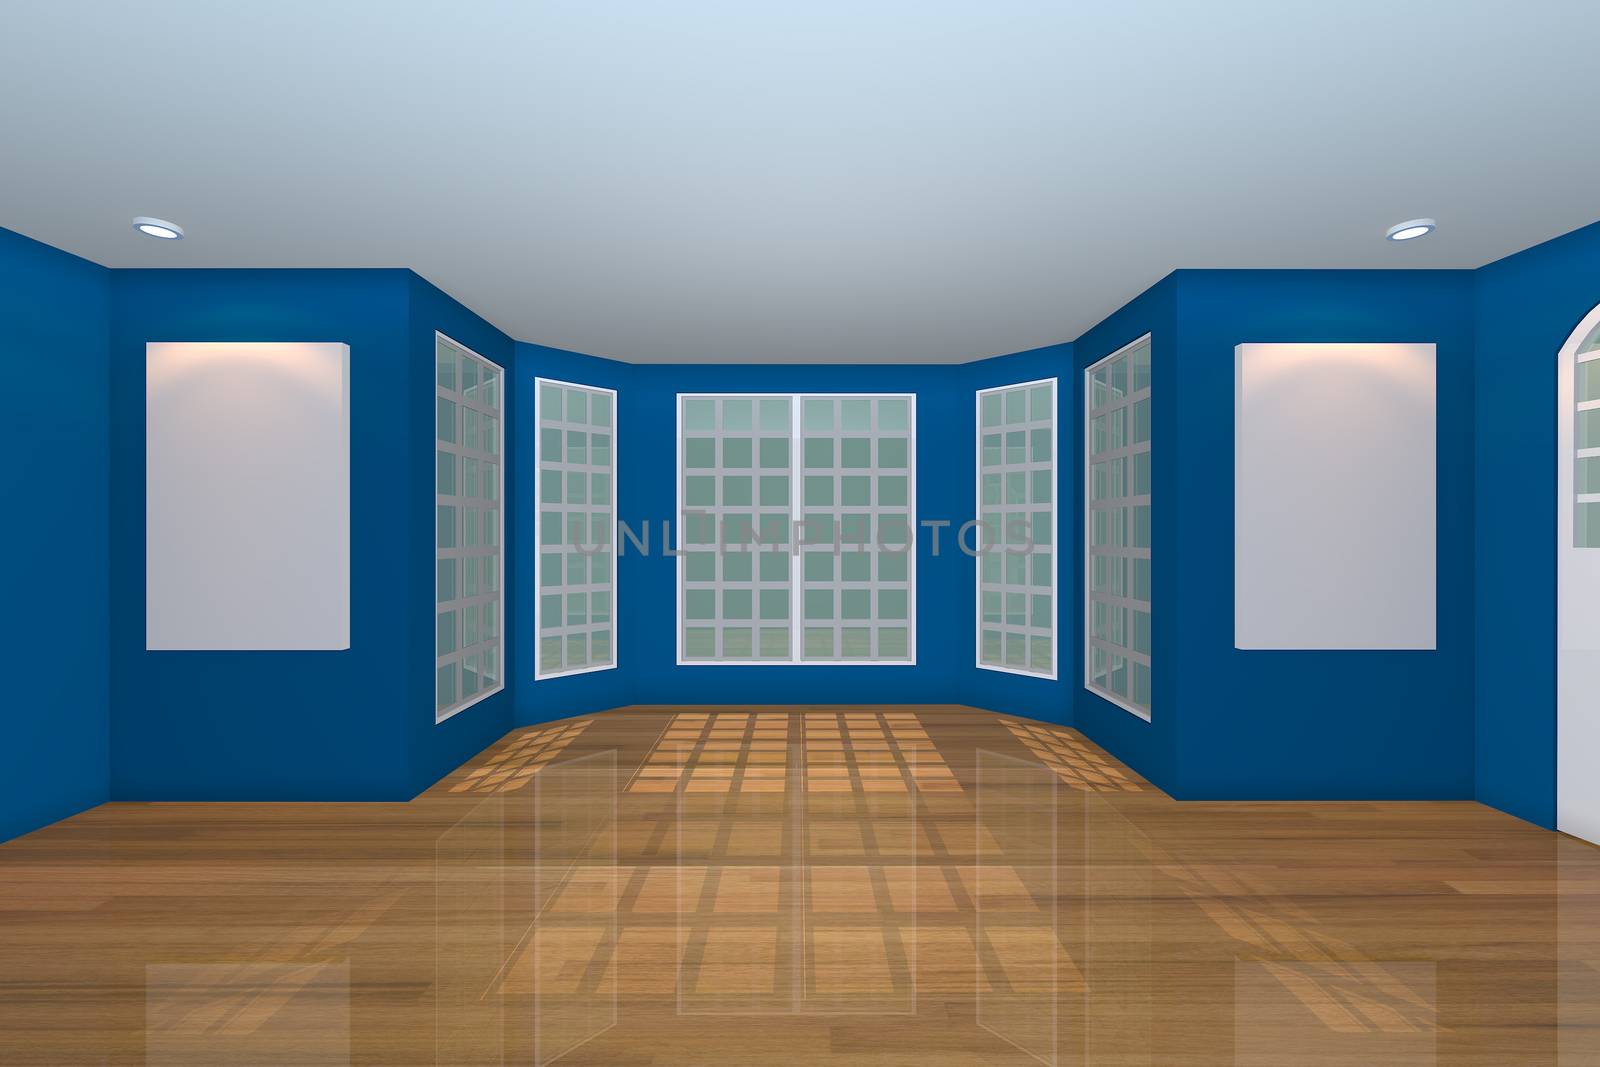 Home interior rendering with empty room color blue wall and decorated with wooden floors. 